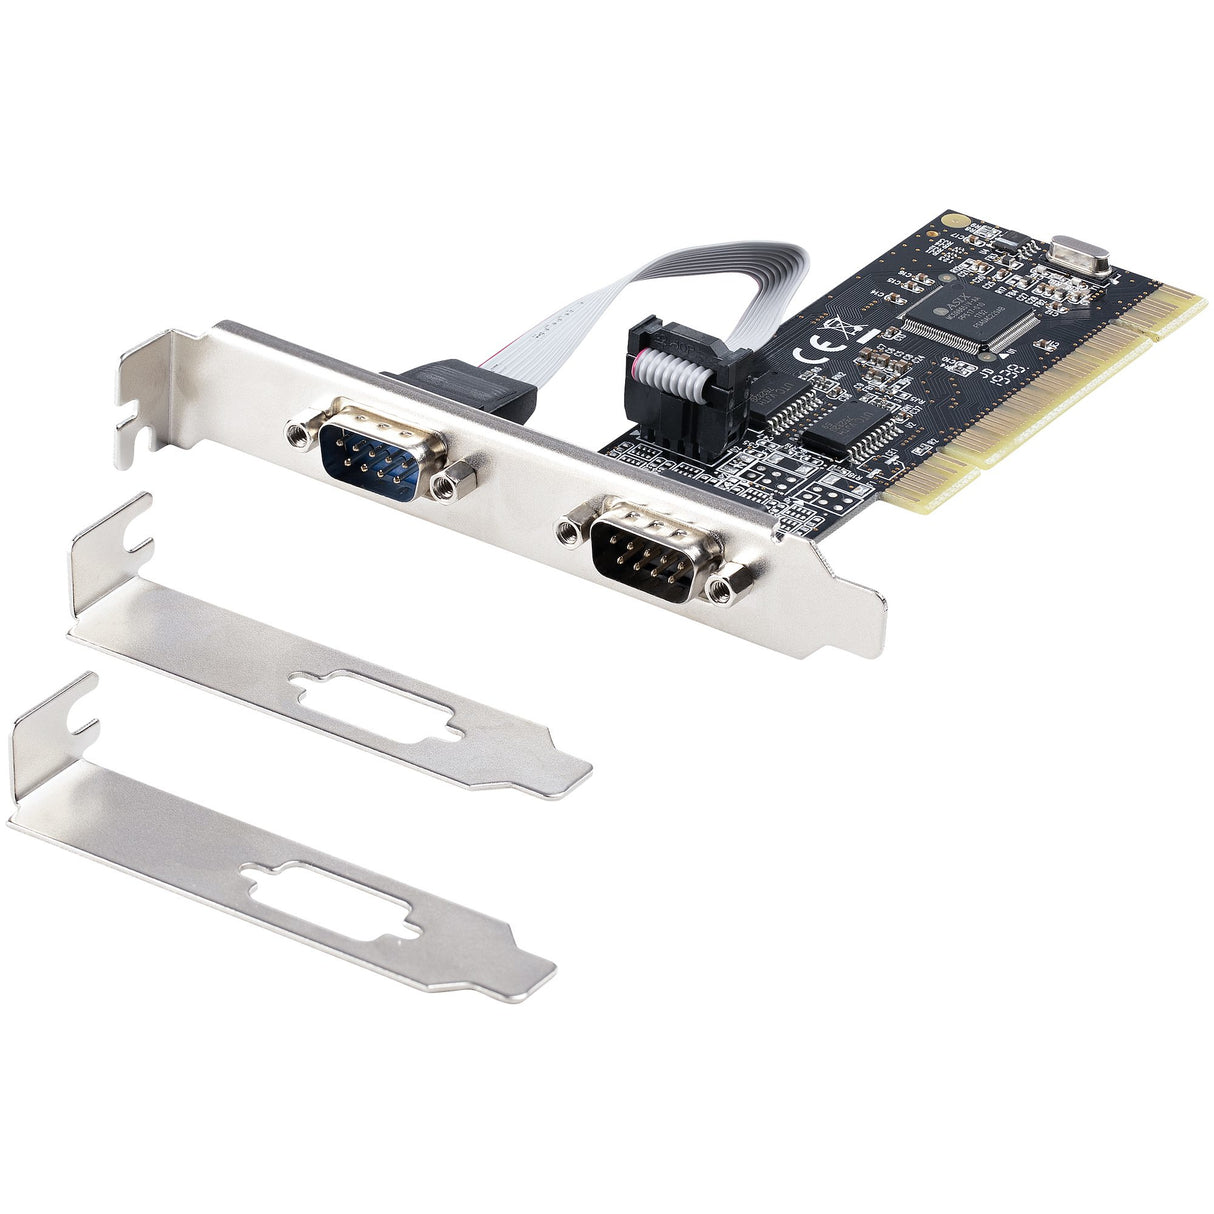 STARTECH 2-Port PCI RS232 Serial Adapter Card - PCI Serial Port Expansion Controller Card - PCI to Dual Serial DB9 Card - Standard (Installed) & Low Profile Brackets | Windows|Linux (PCI2S5502) (PCI2S5502) STARTECH